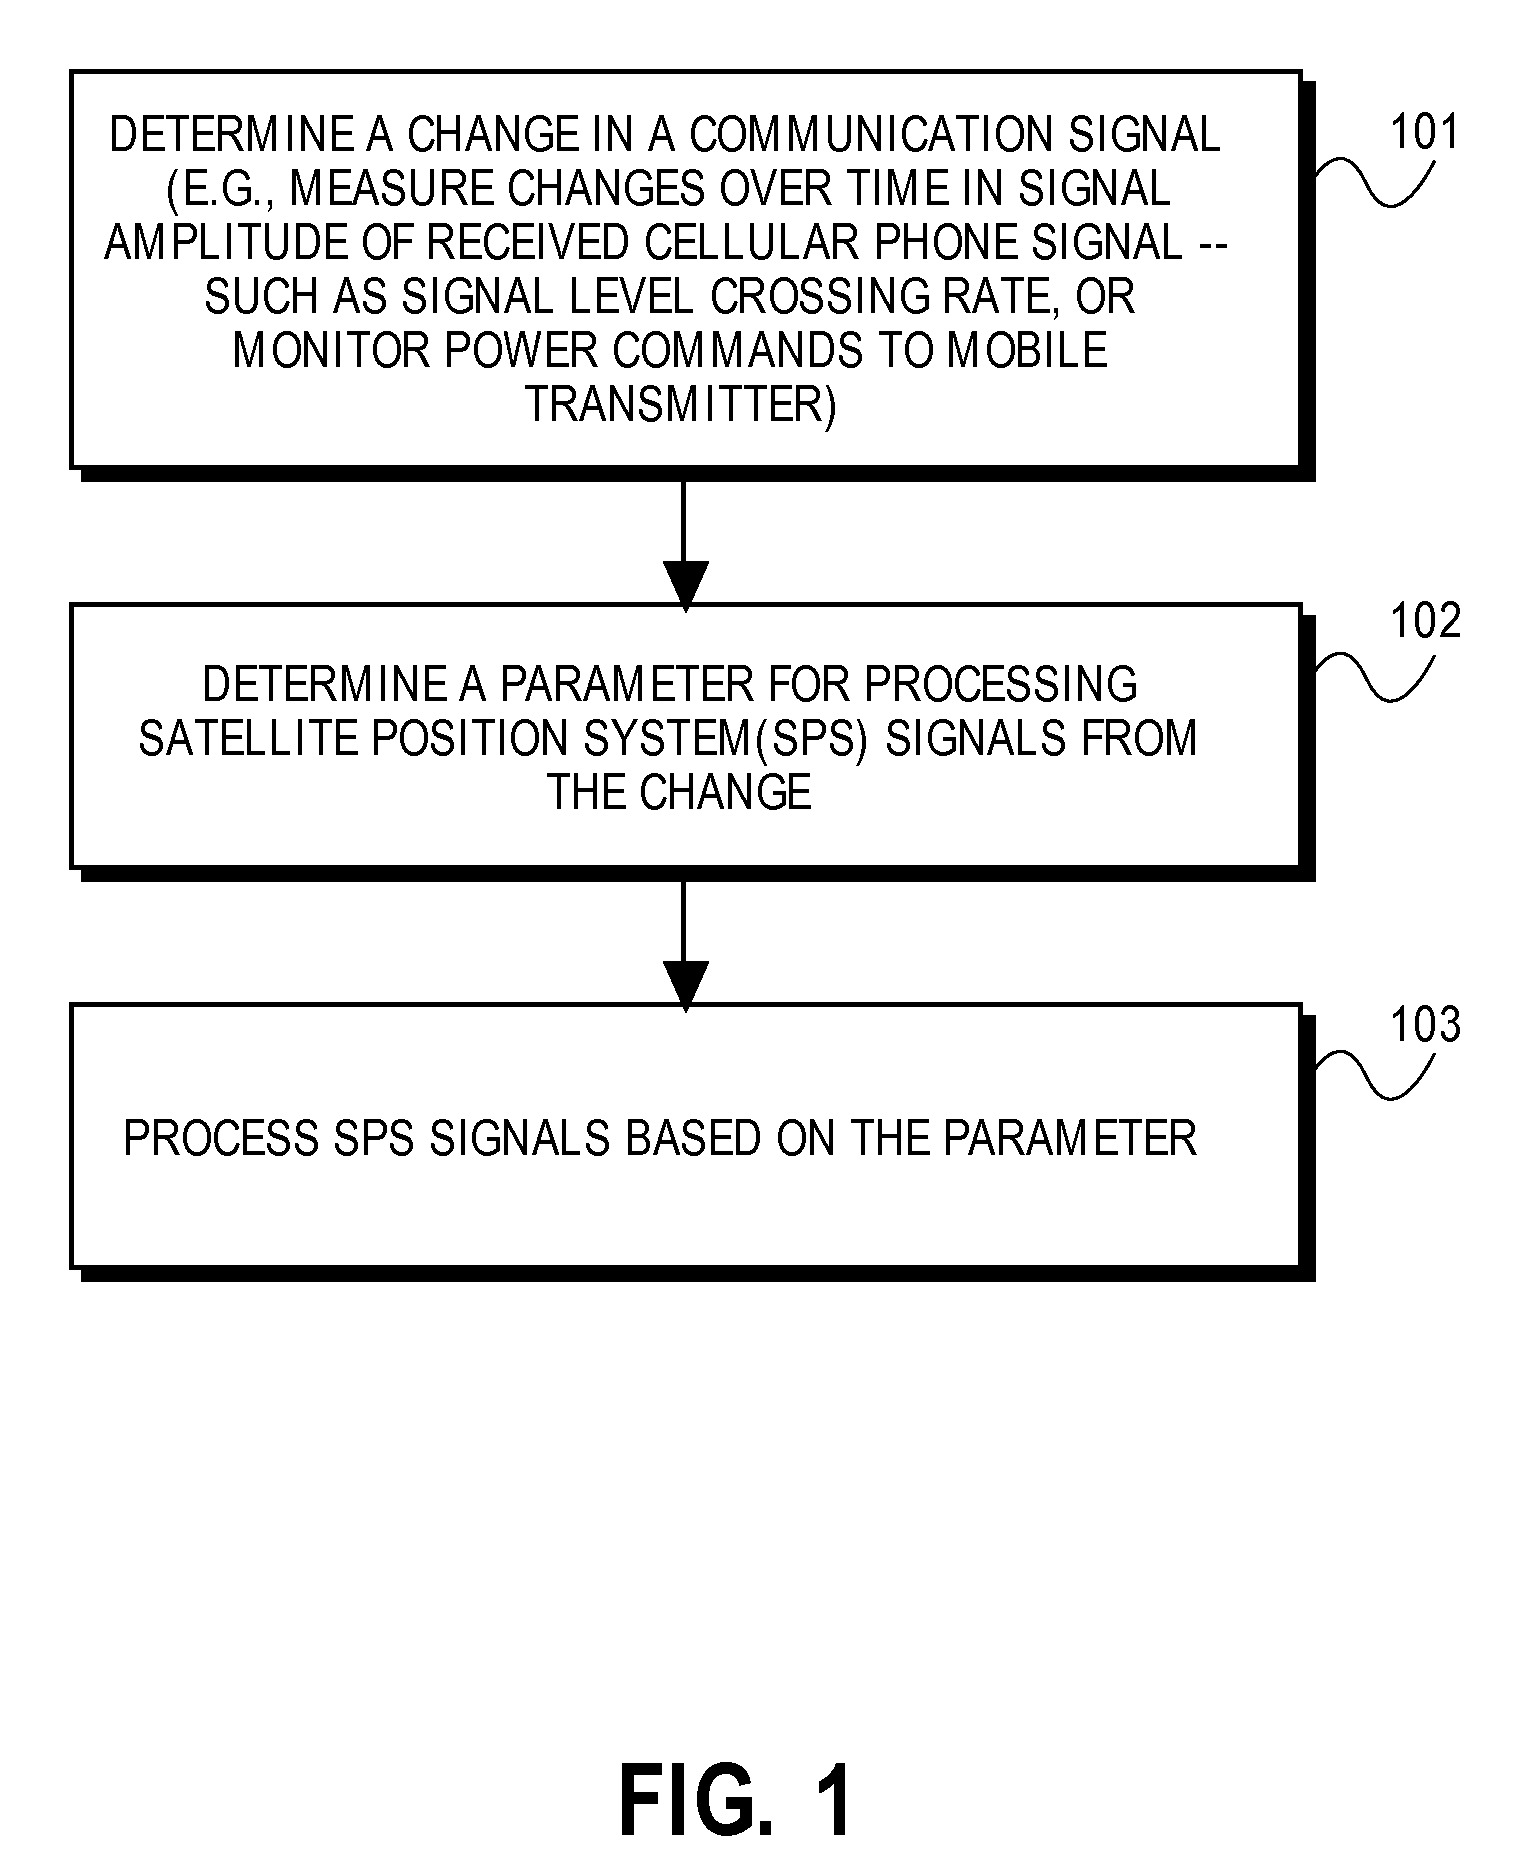 Method For Determining A Change In A Communication Signal And Using This Information To Improve SPS Signal Reception And Processing